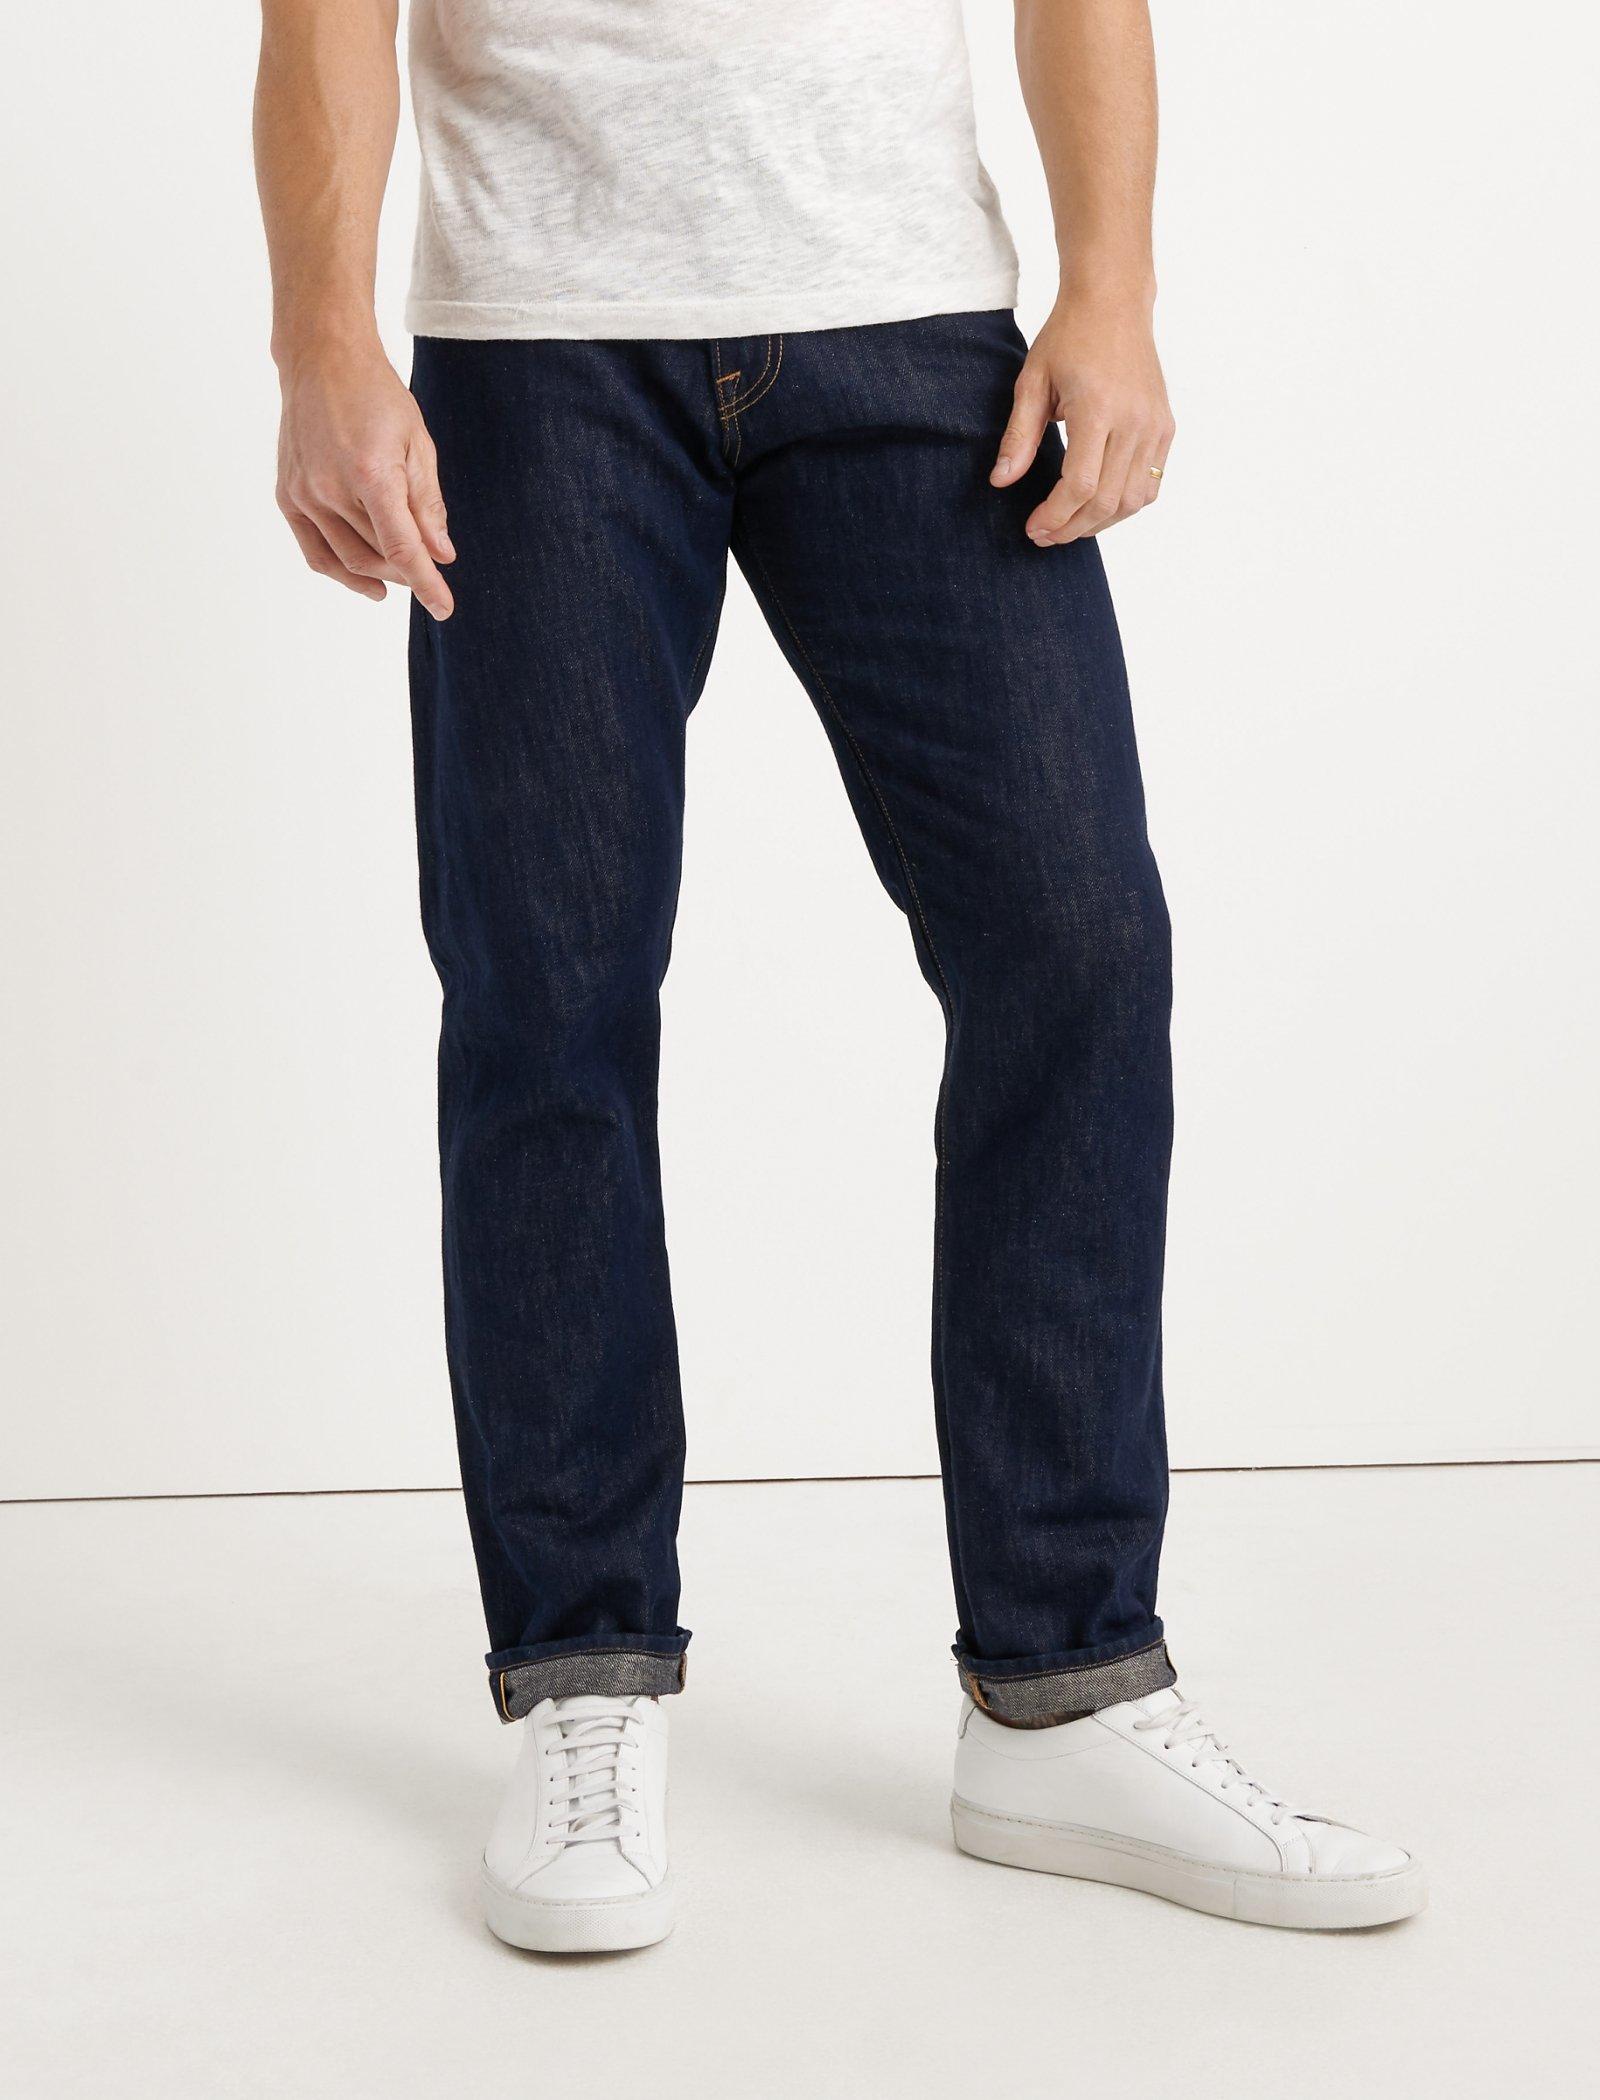 citizens of humanity coated jeans